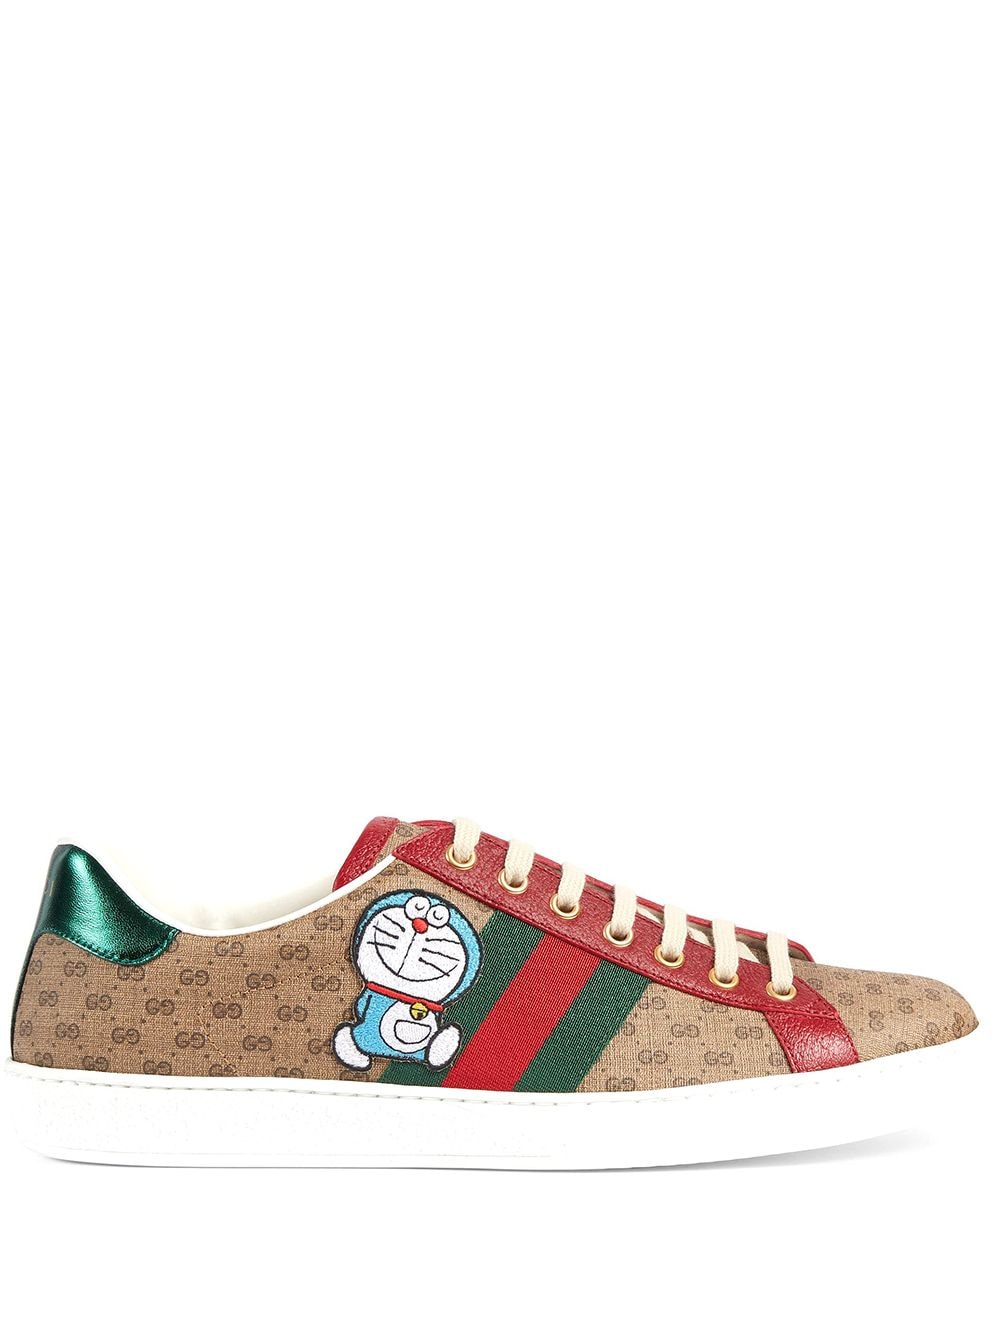 gucci skate shoes